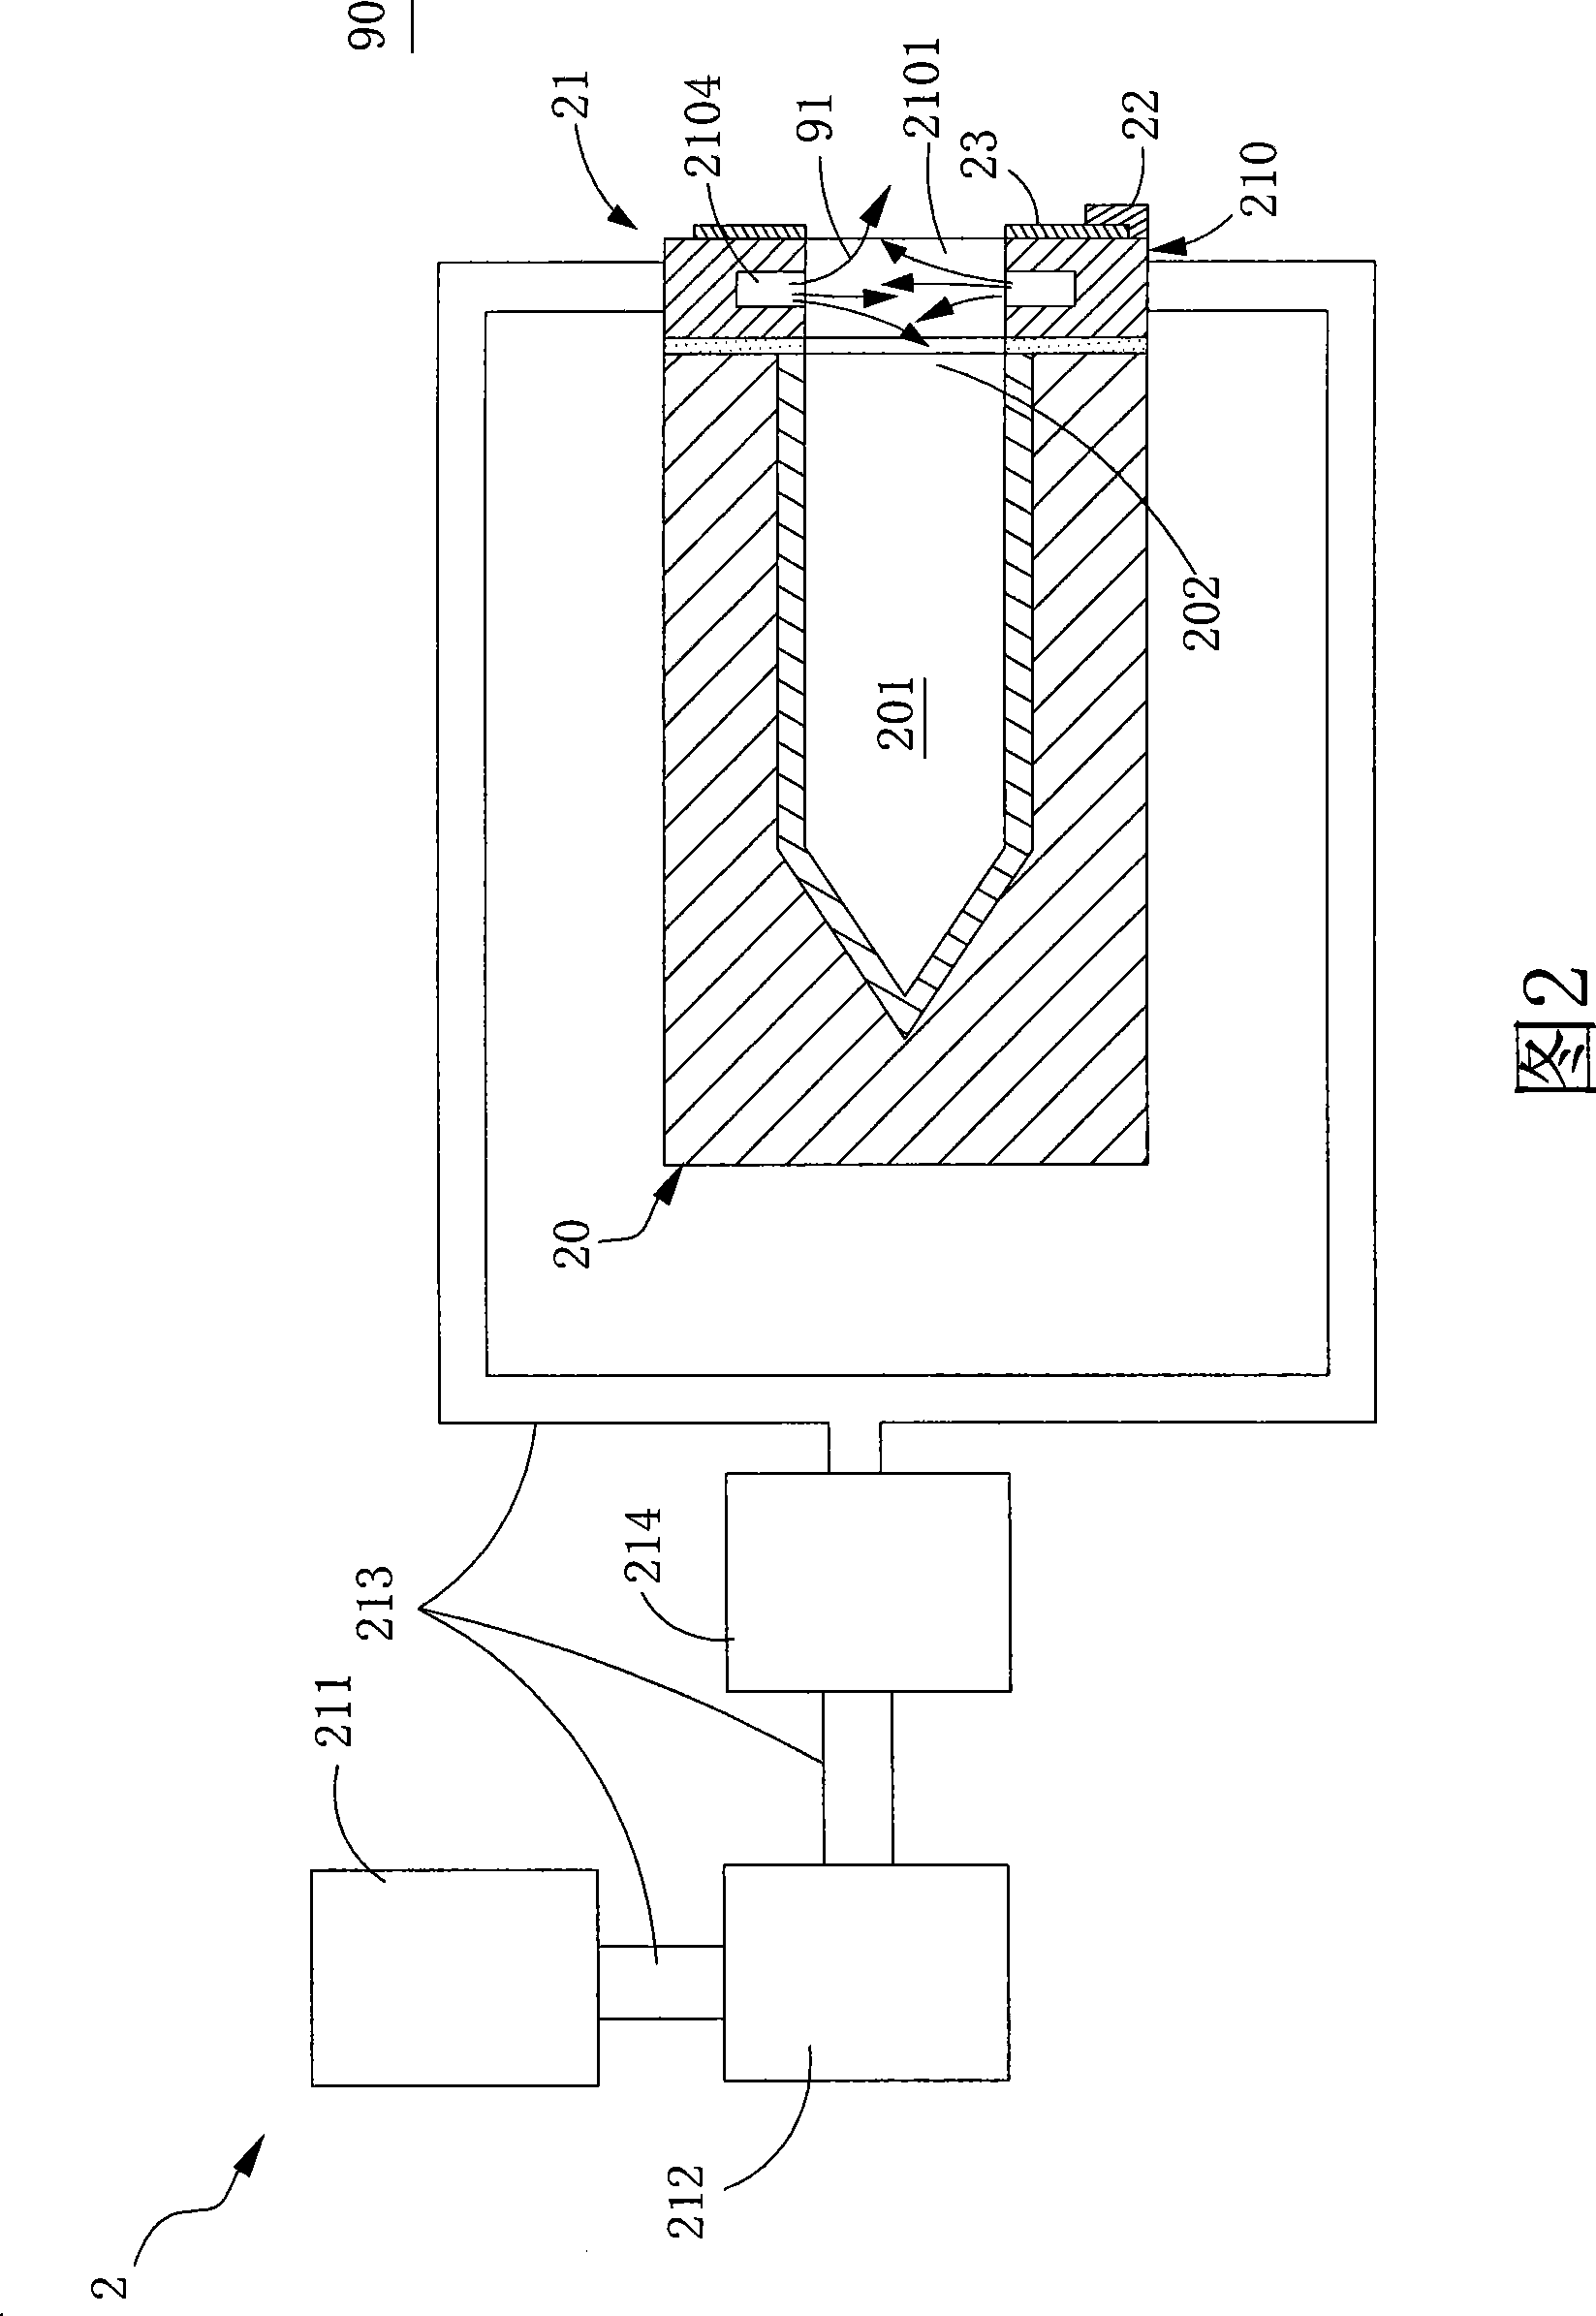 Radiation standard apparatus for preventing heat convection mechanism